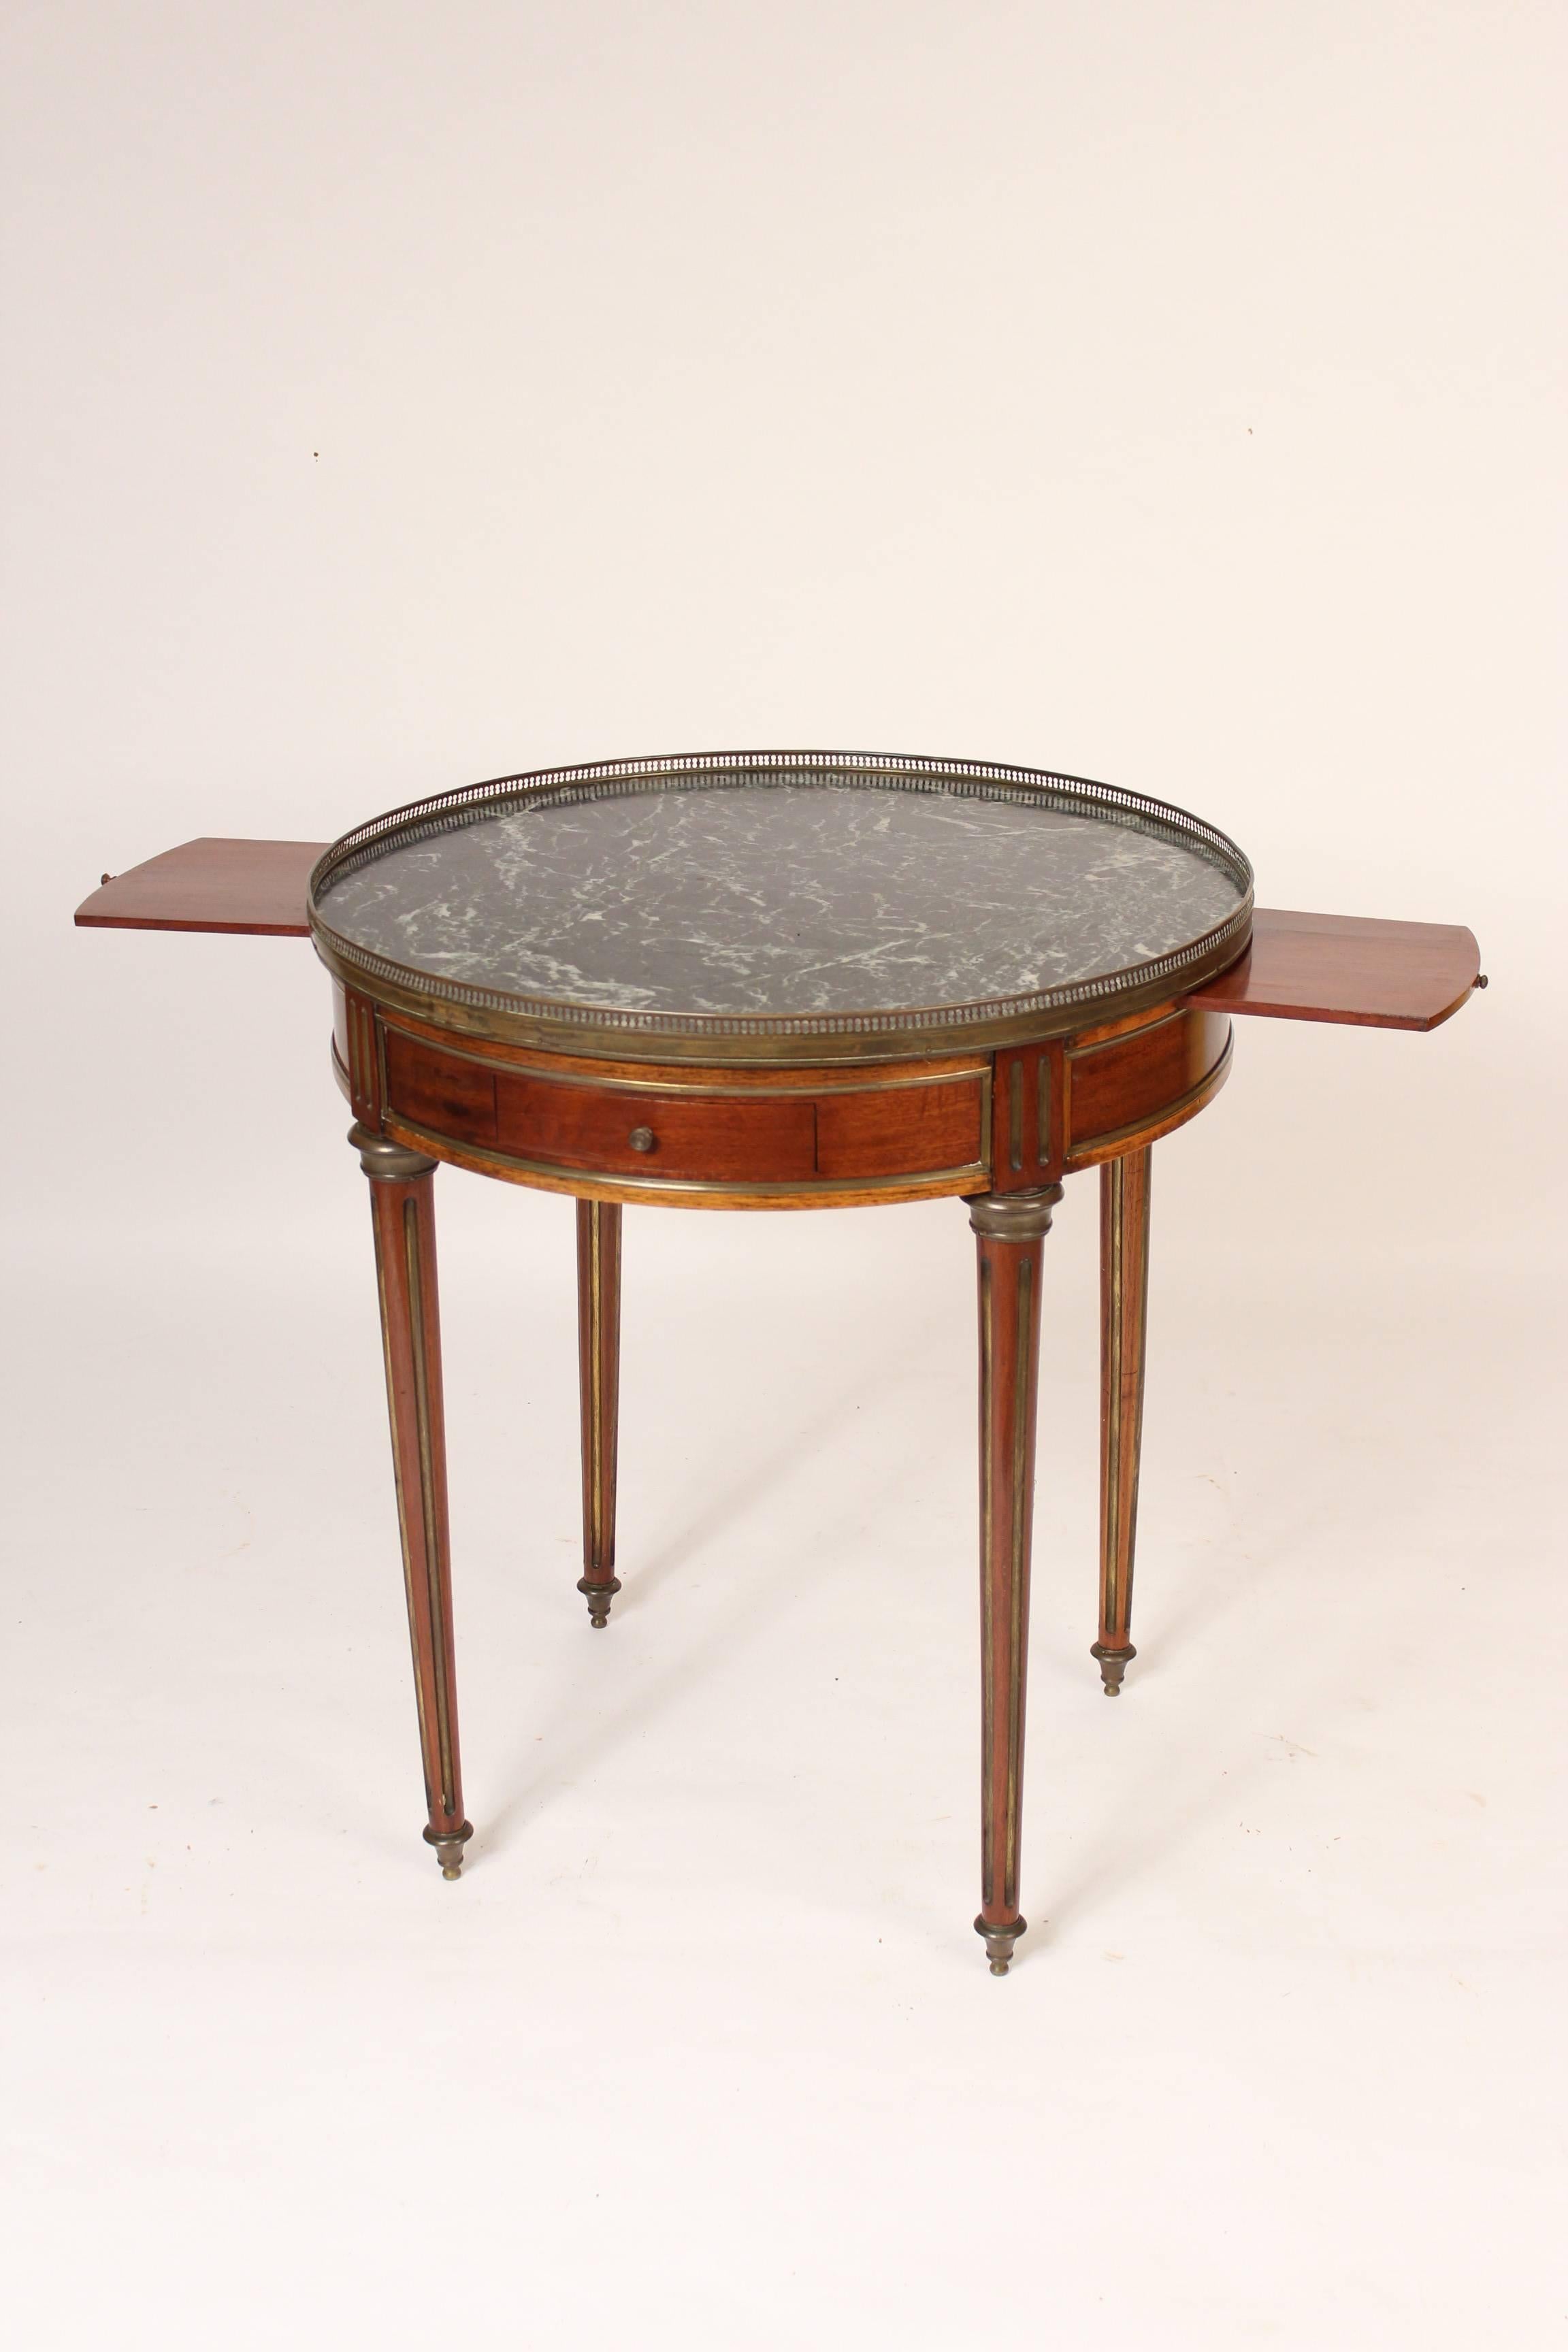 Louis XVI style mahogany bouillotte table with marble top, circa 1900. Features on this table include, fine quality mahogany panels on the frieze, brass inlaid legs, brass moldings on the frieze and reticulated brass gallery surrounding the marble